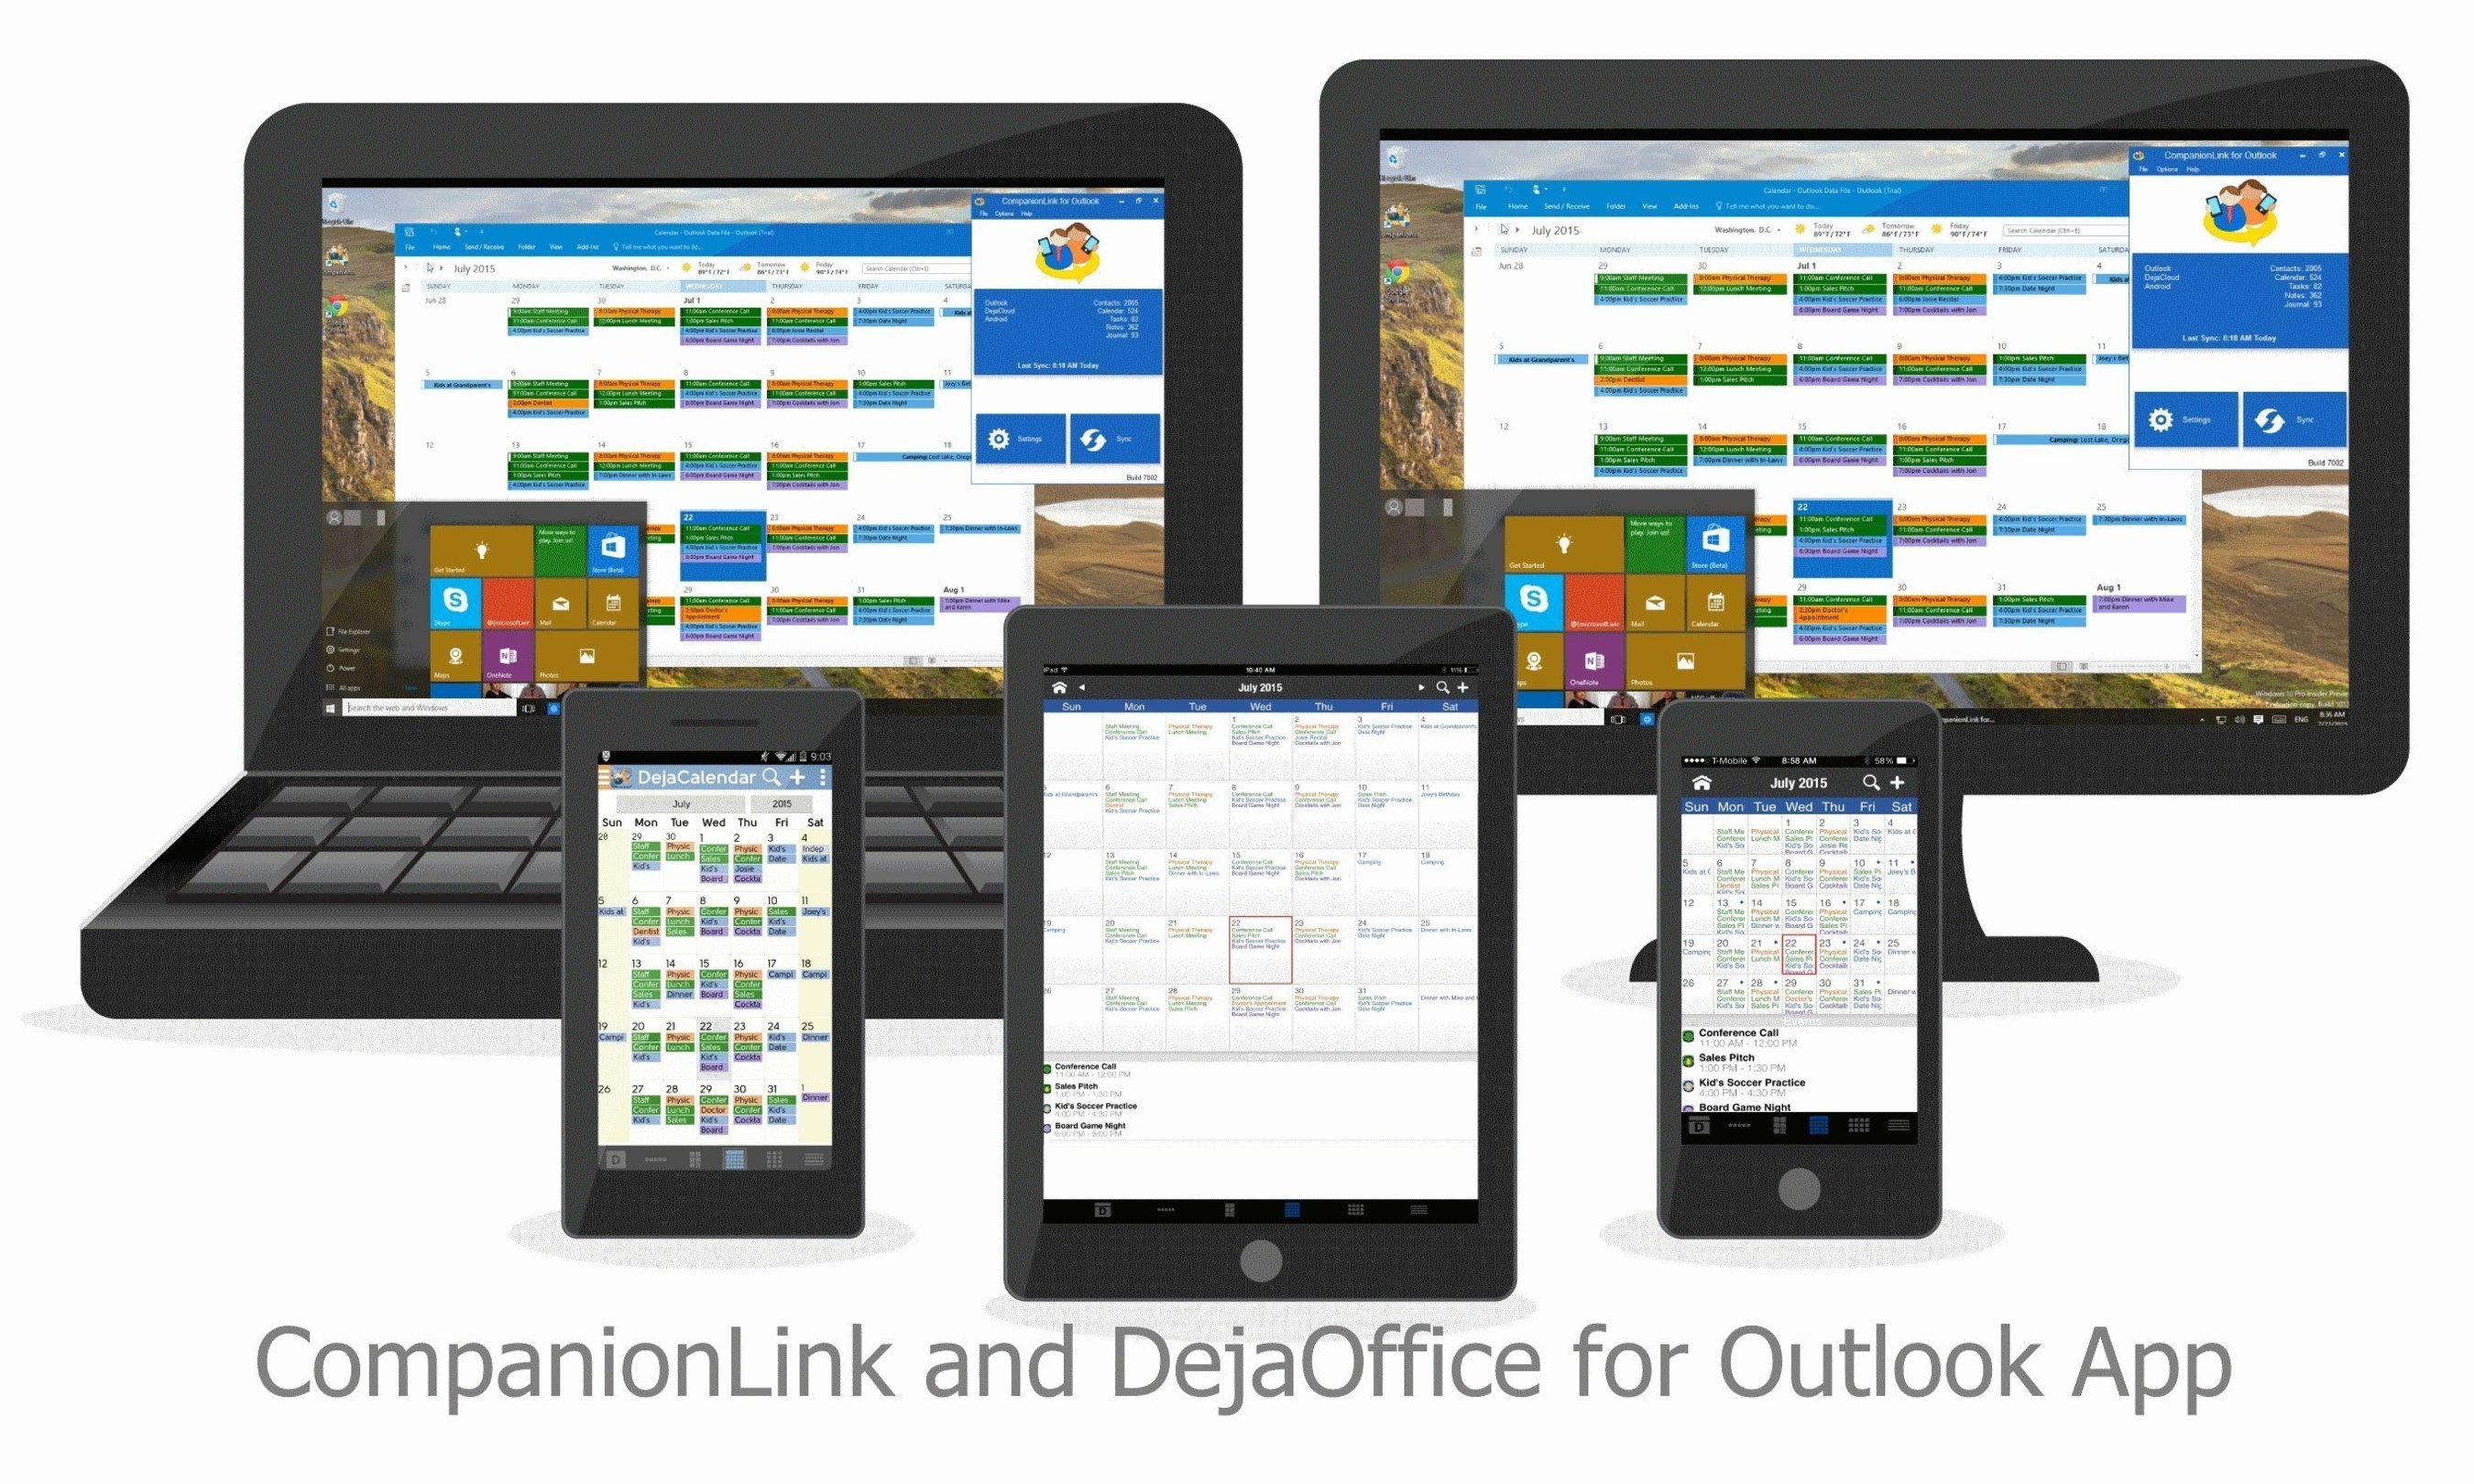 CompanionLink and DejaOffice for iPhone 6s, 6s Plus and iPad Pro